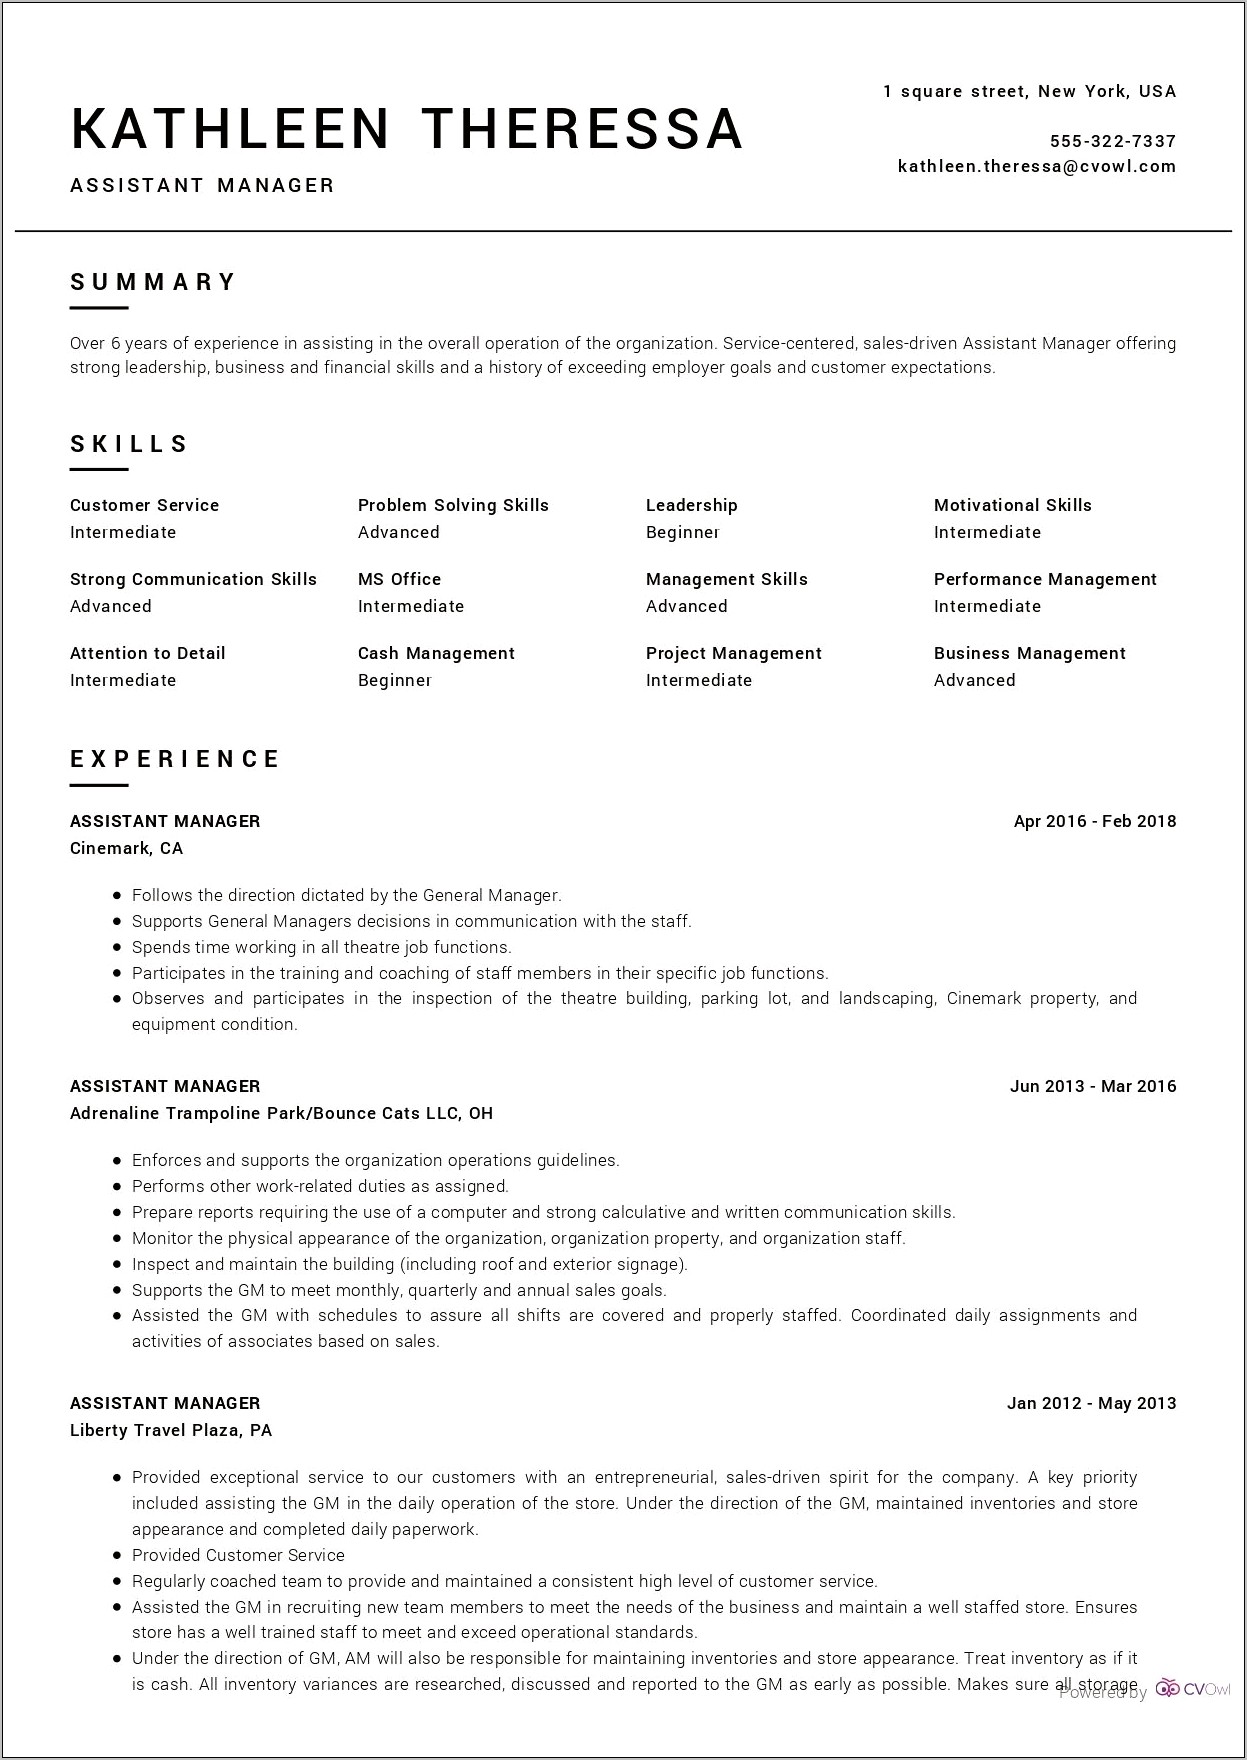 Good Resume Objectives For Ex Assistant Manager